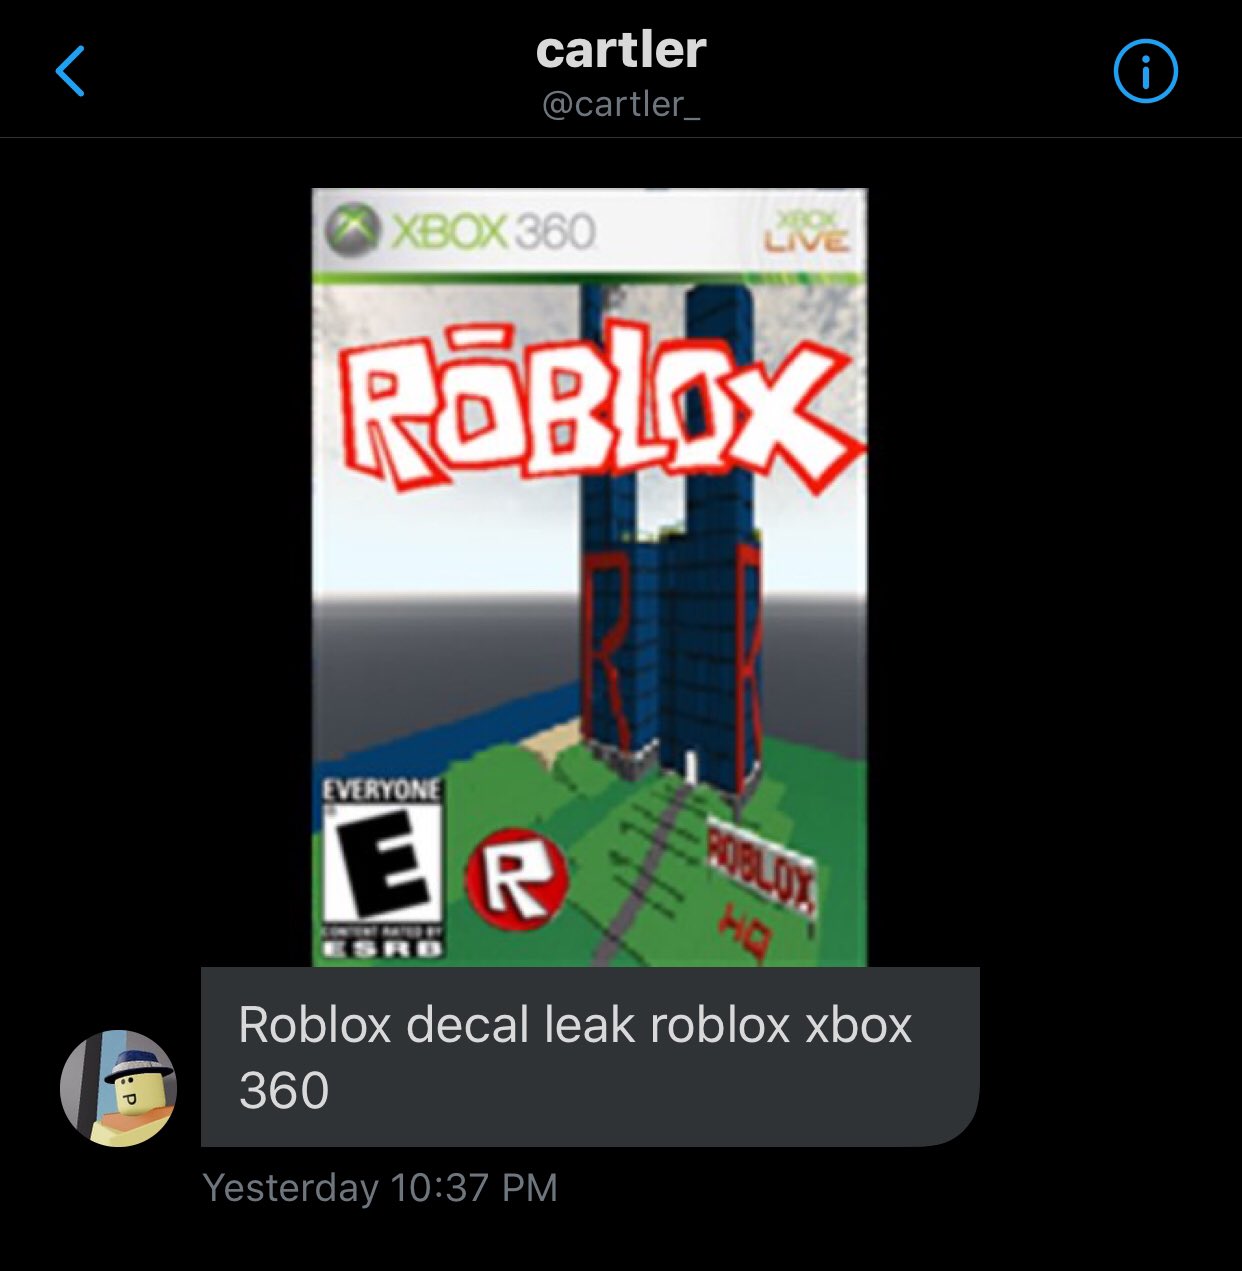 News Roblox On Twitter Roblox On Xbox 360 - how to sign up in roblox xbox360